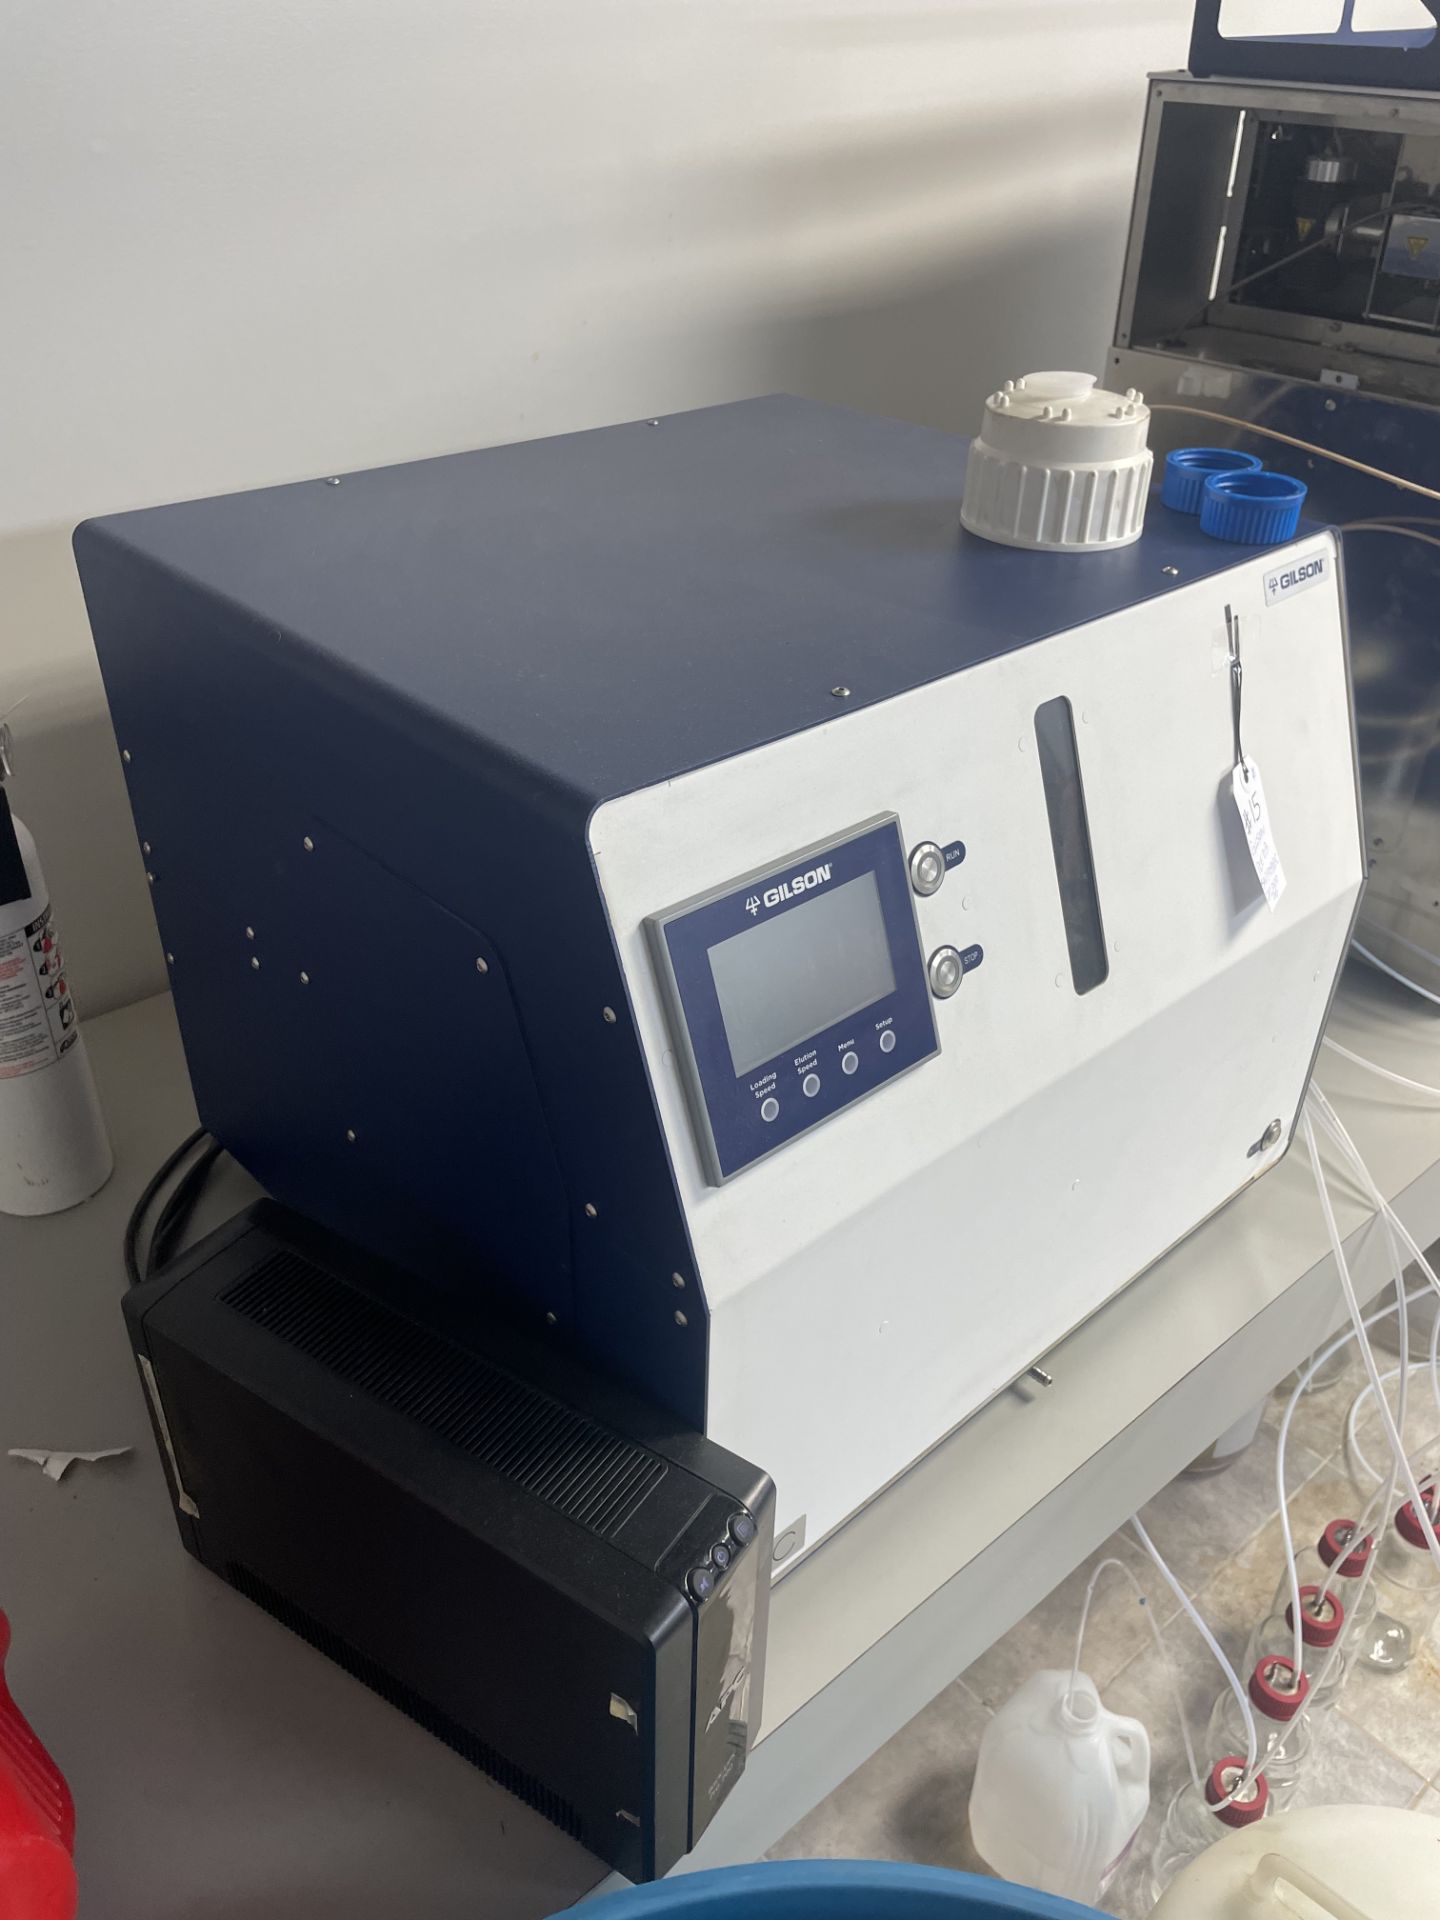 Used Gilson Centrifugal Partition Chromatography (CPC) Model CPC 1000 PRO. Up to 350 mL/min. - Image 2 of 9